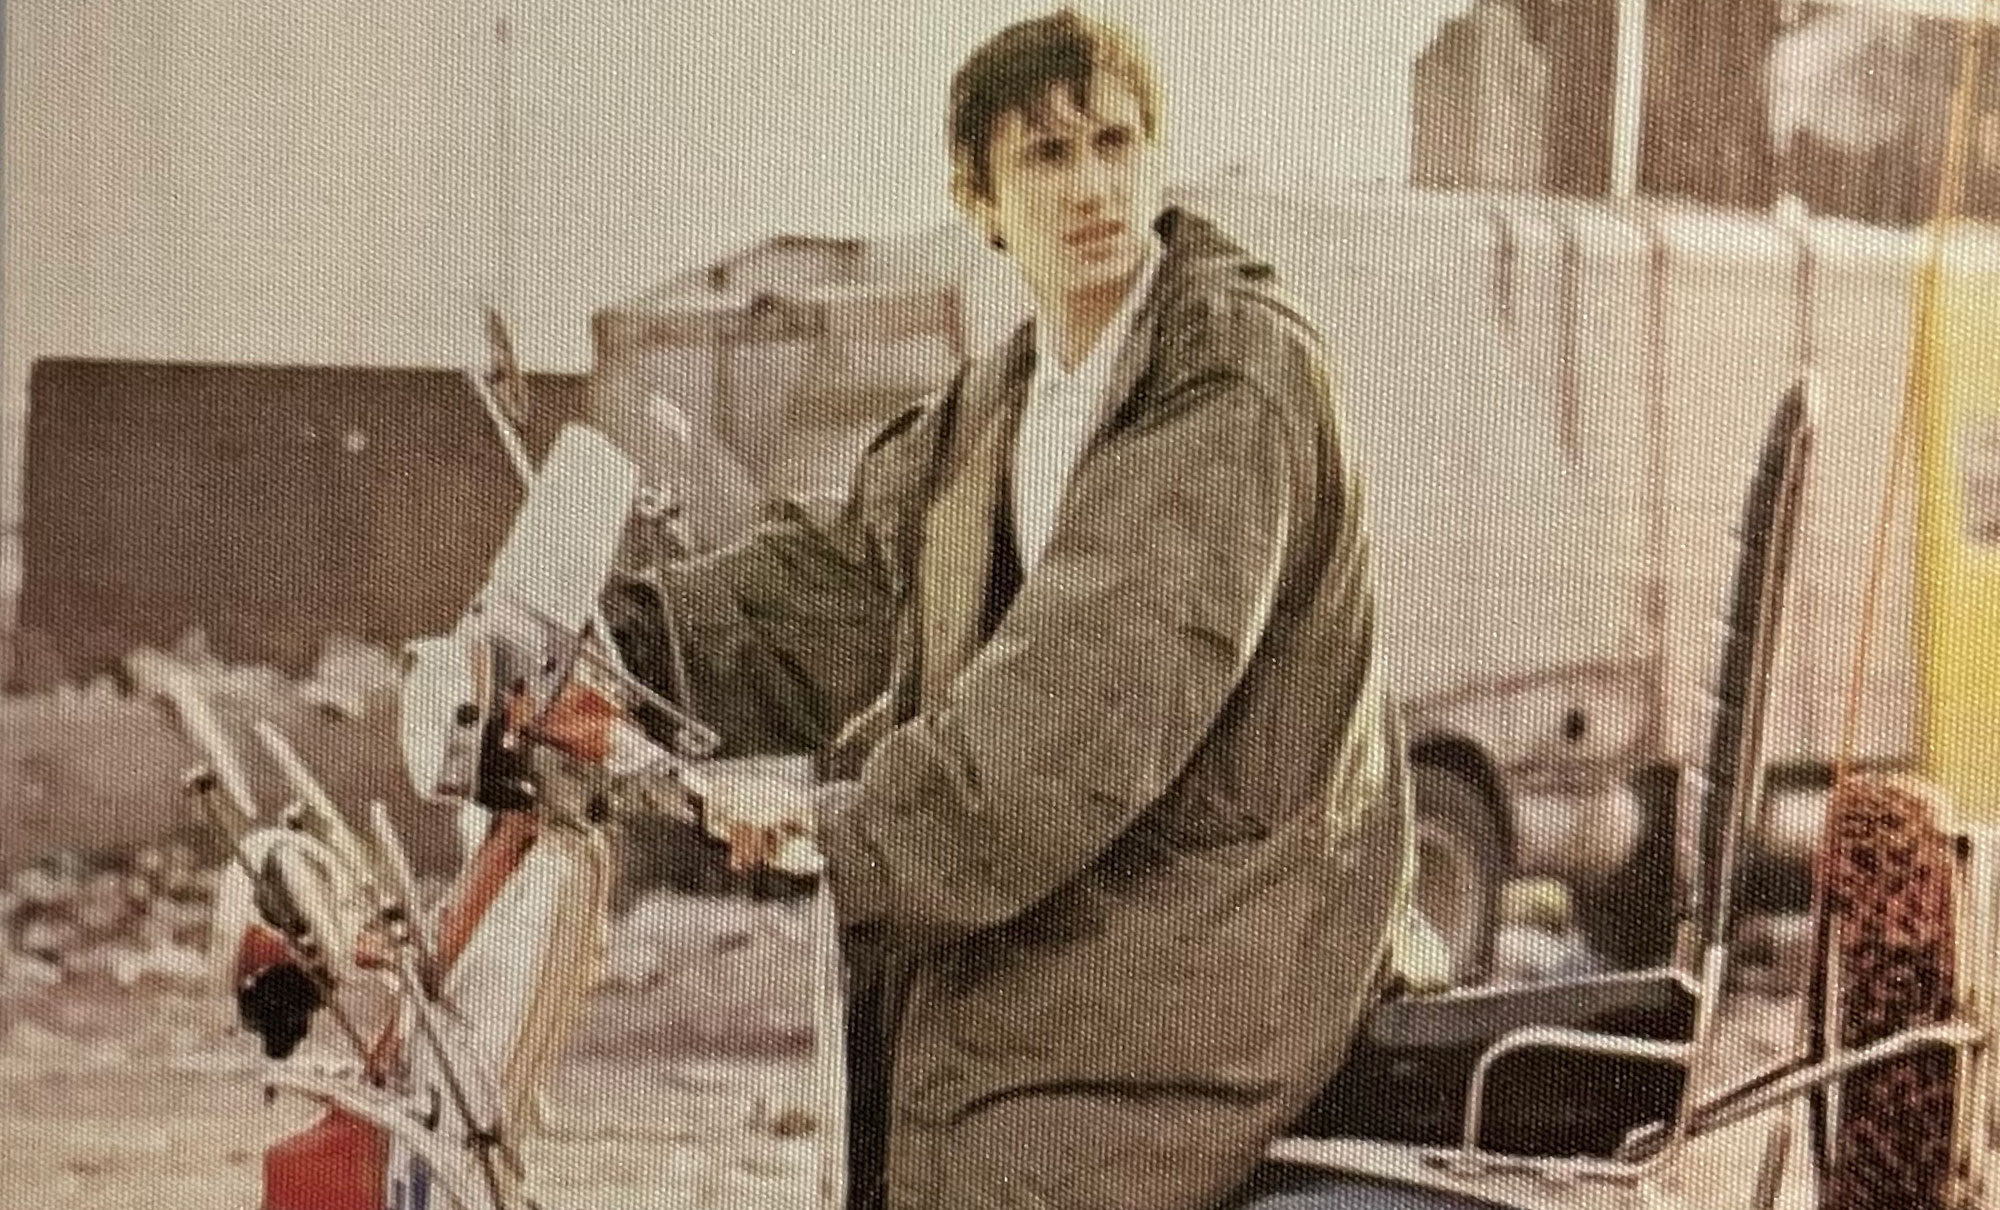 Protagonist character Jimmy Cooper sits on a red scooter with his hands on the handlebar in the 1979 film “Quadrophenia,” wearing a military fishtail parka and looking off towards the right.